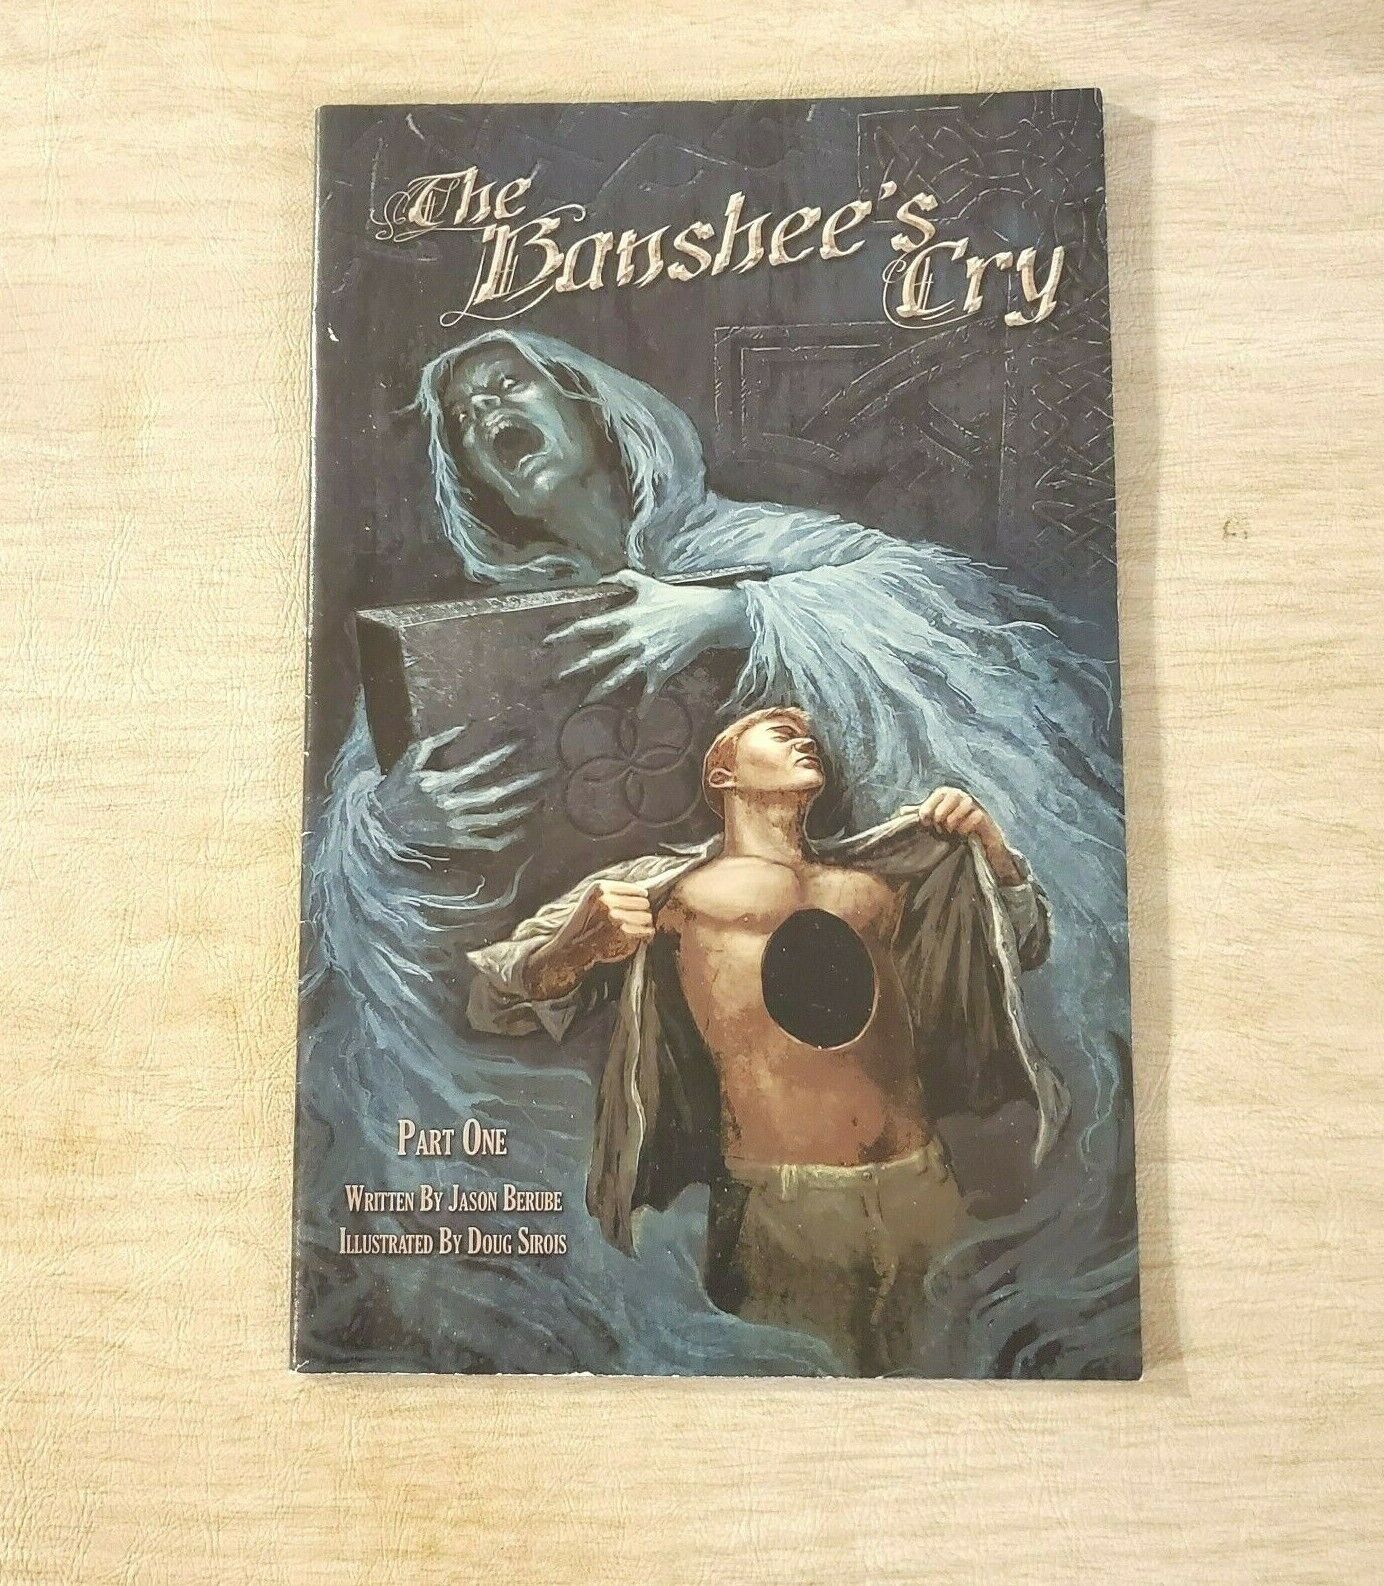 The Banshee's Cry Part One by Jason Berube. Illustrated by Doug Sirois. Rare.